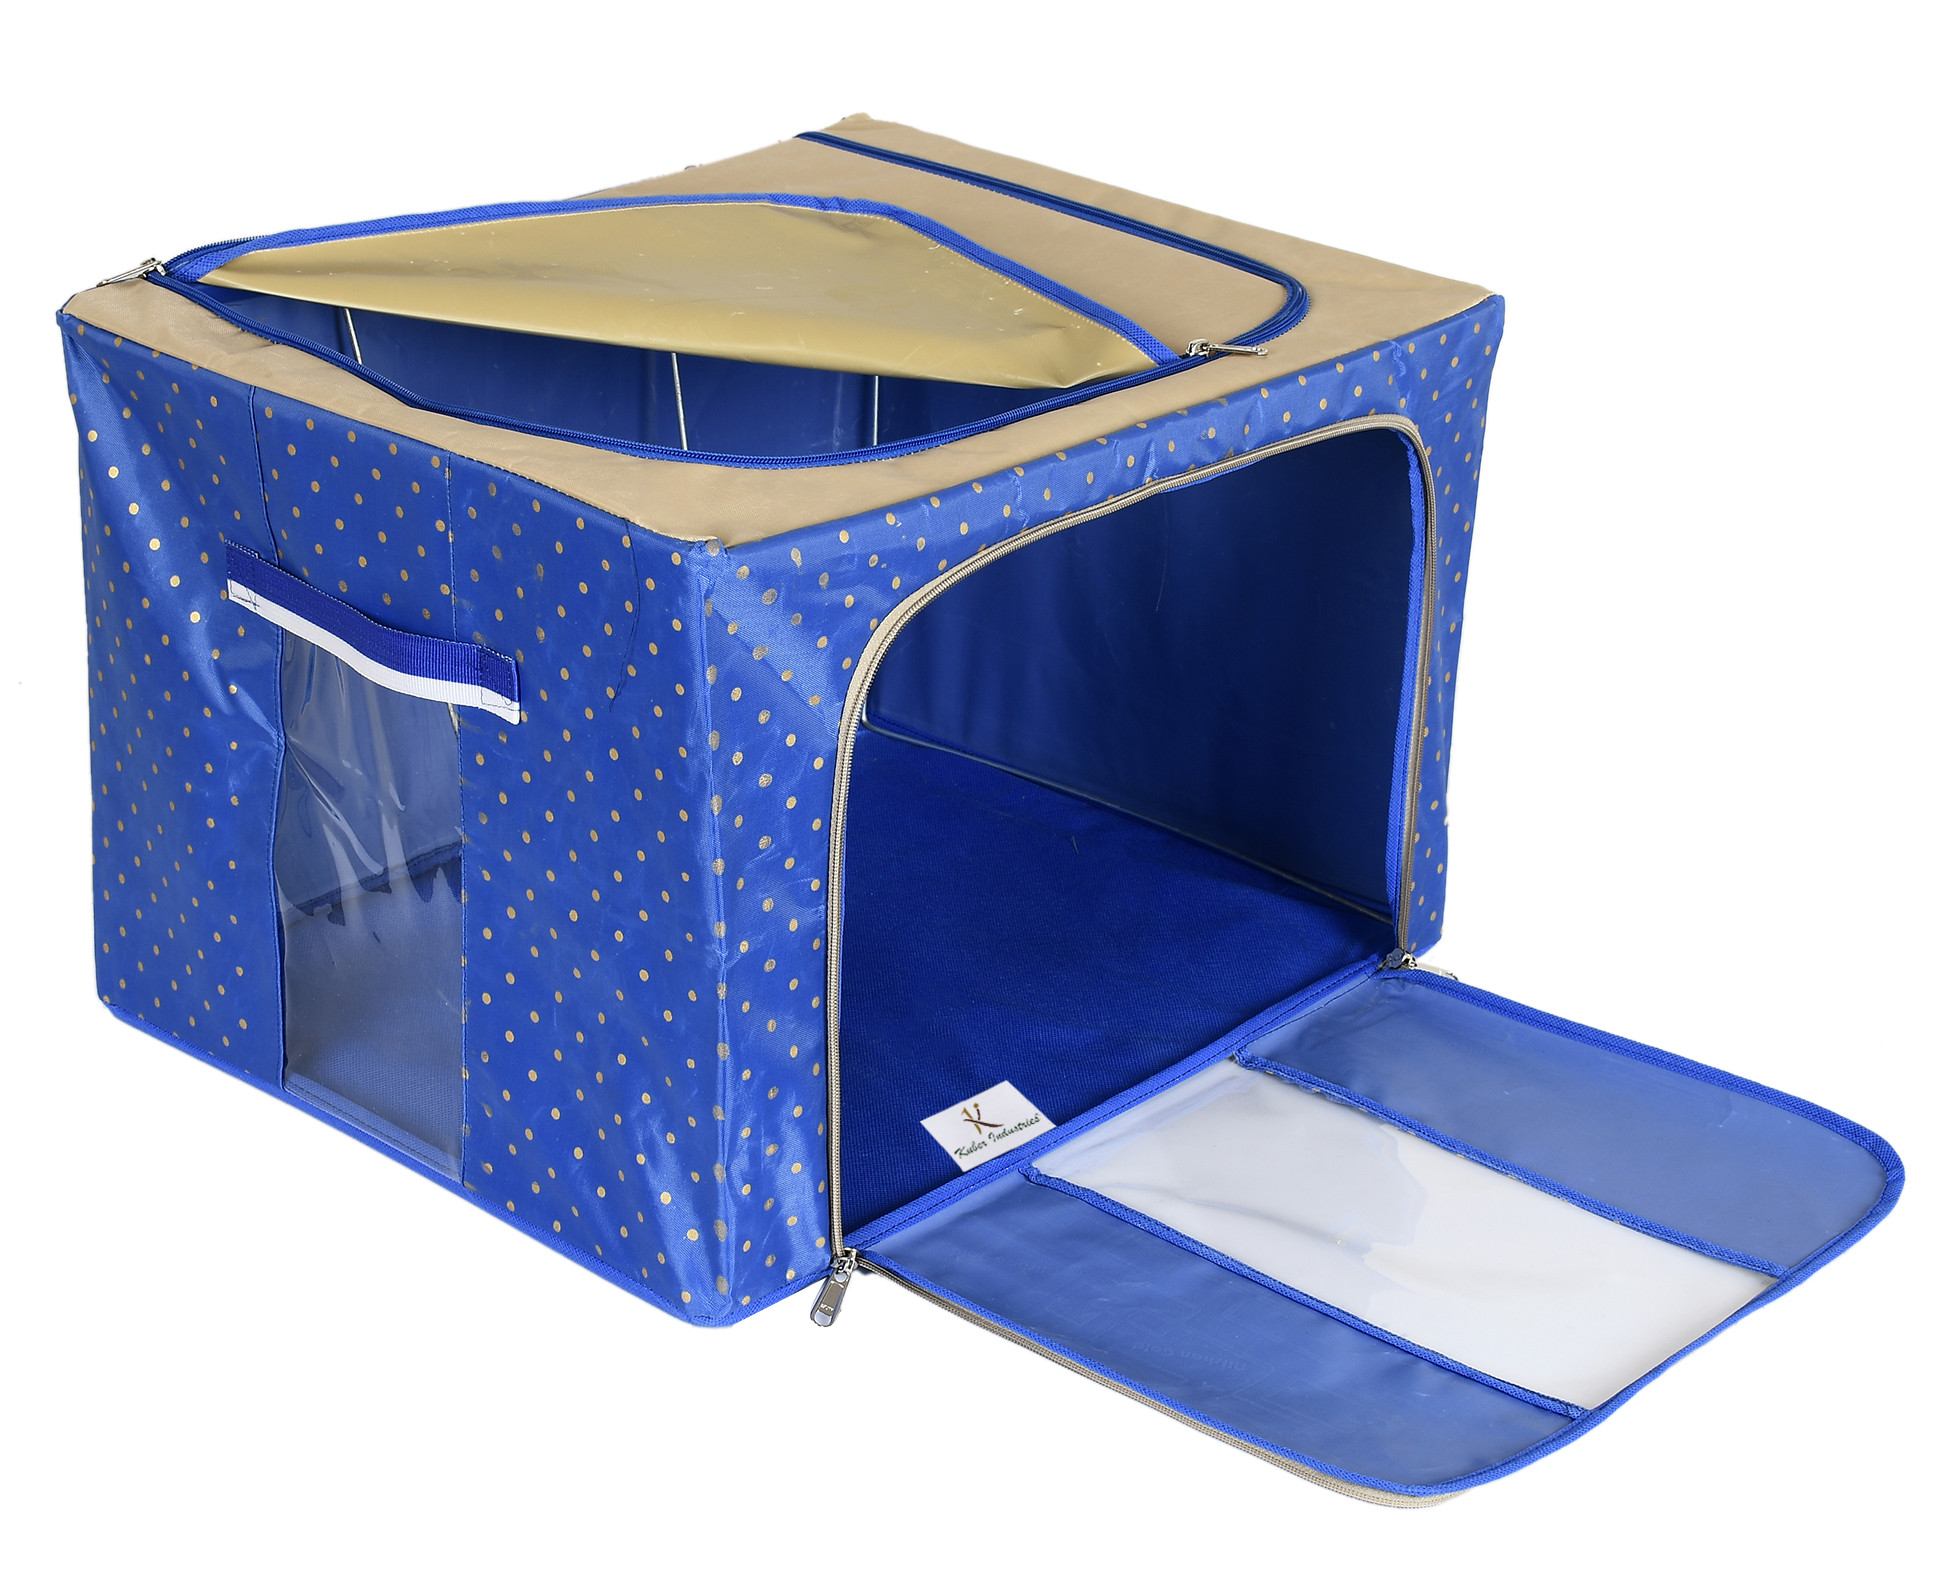 Kuber Industries Dot Printed Steel Frame Storage Box/Organizer For Clothing, Blankets, Bedding With Clear Window, 88Ltr. (Blue & Brown)-44KM0265